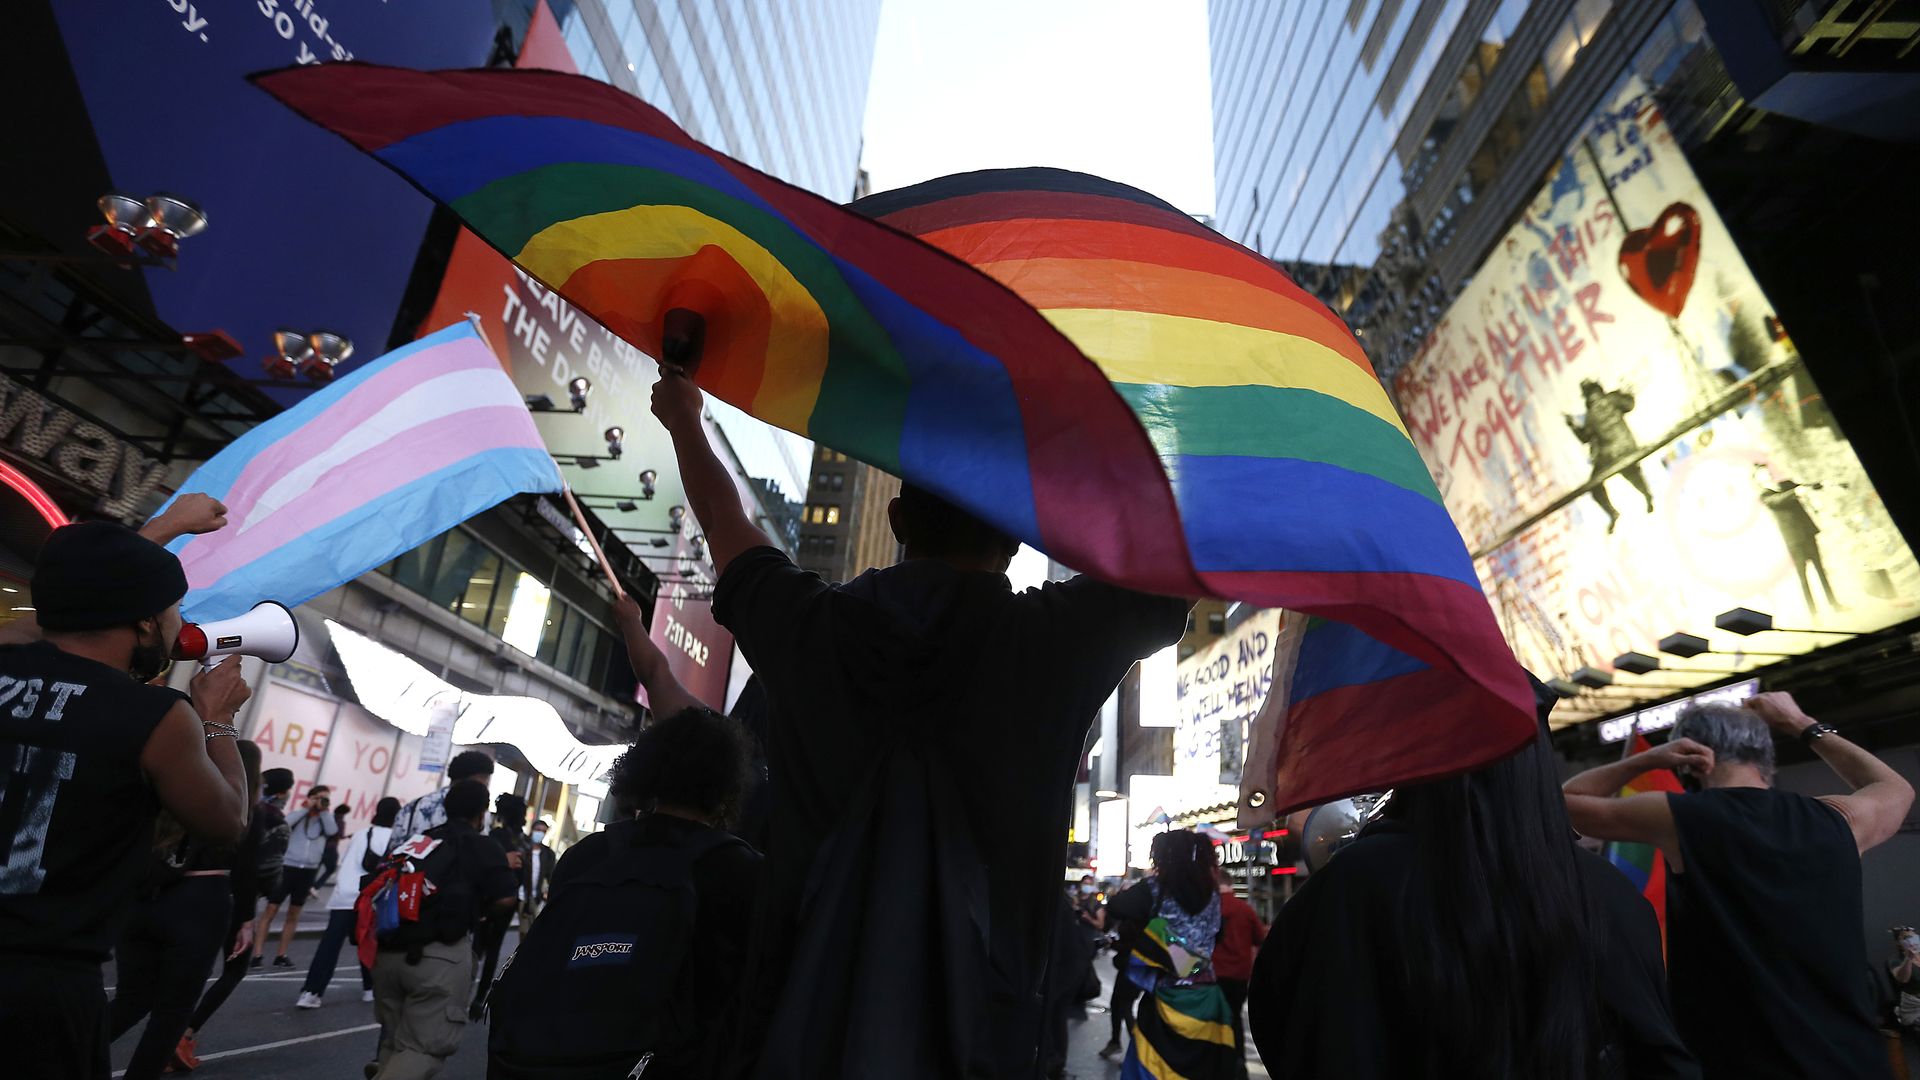 Photo of a person holding a rainbow flag in the air among a group of protesters. The trans flag is also visible.